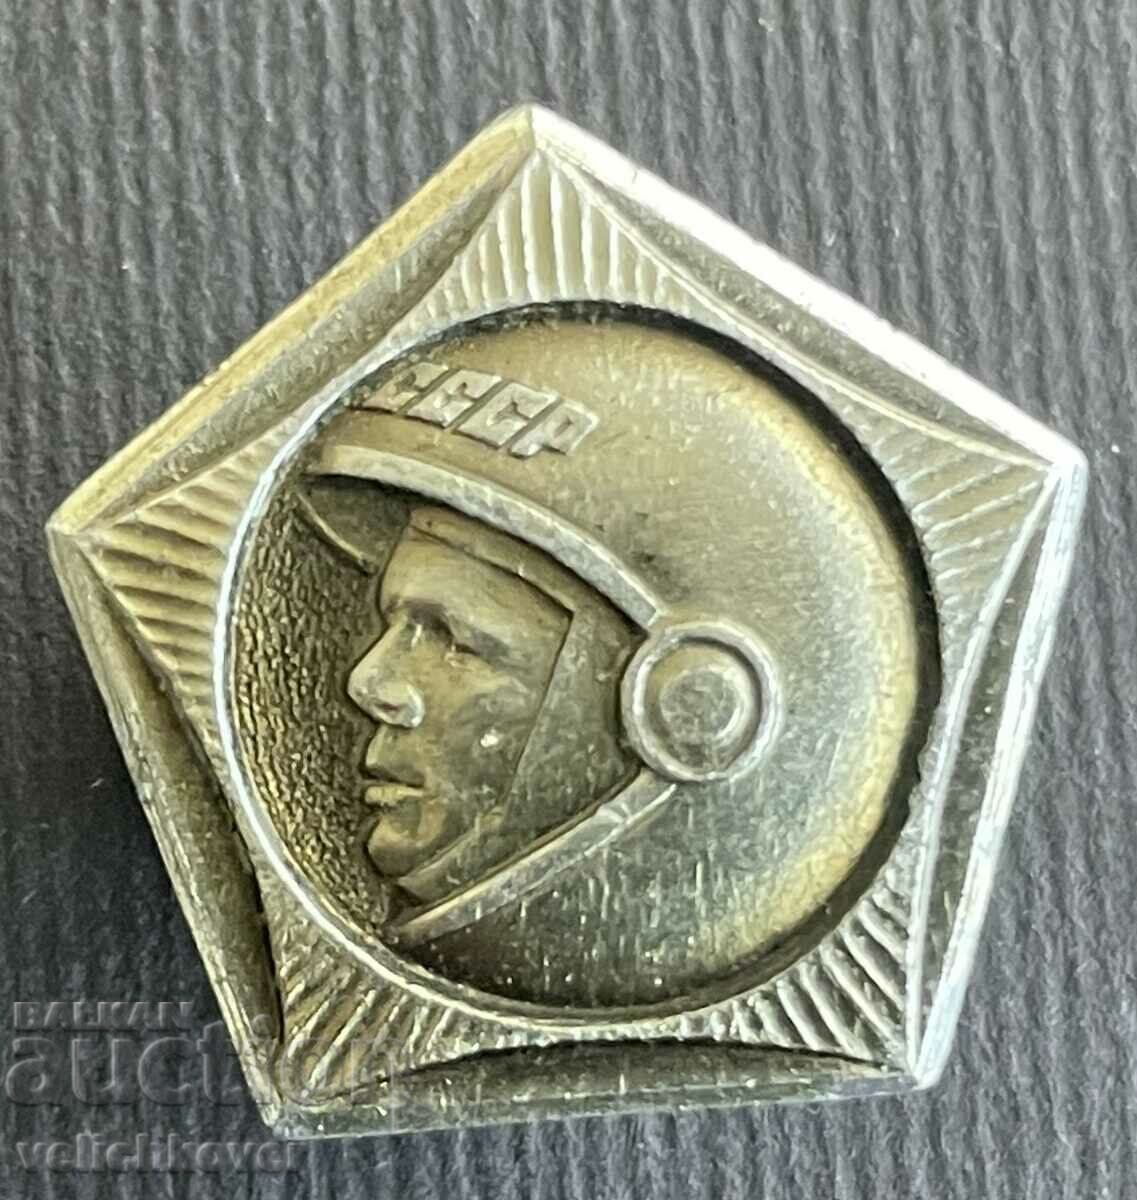 36190 USSR space badge with the image of Yuri Gagarin